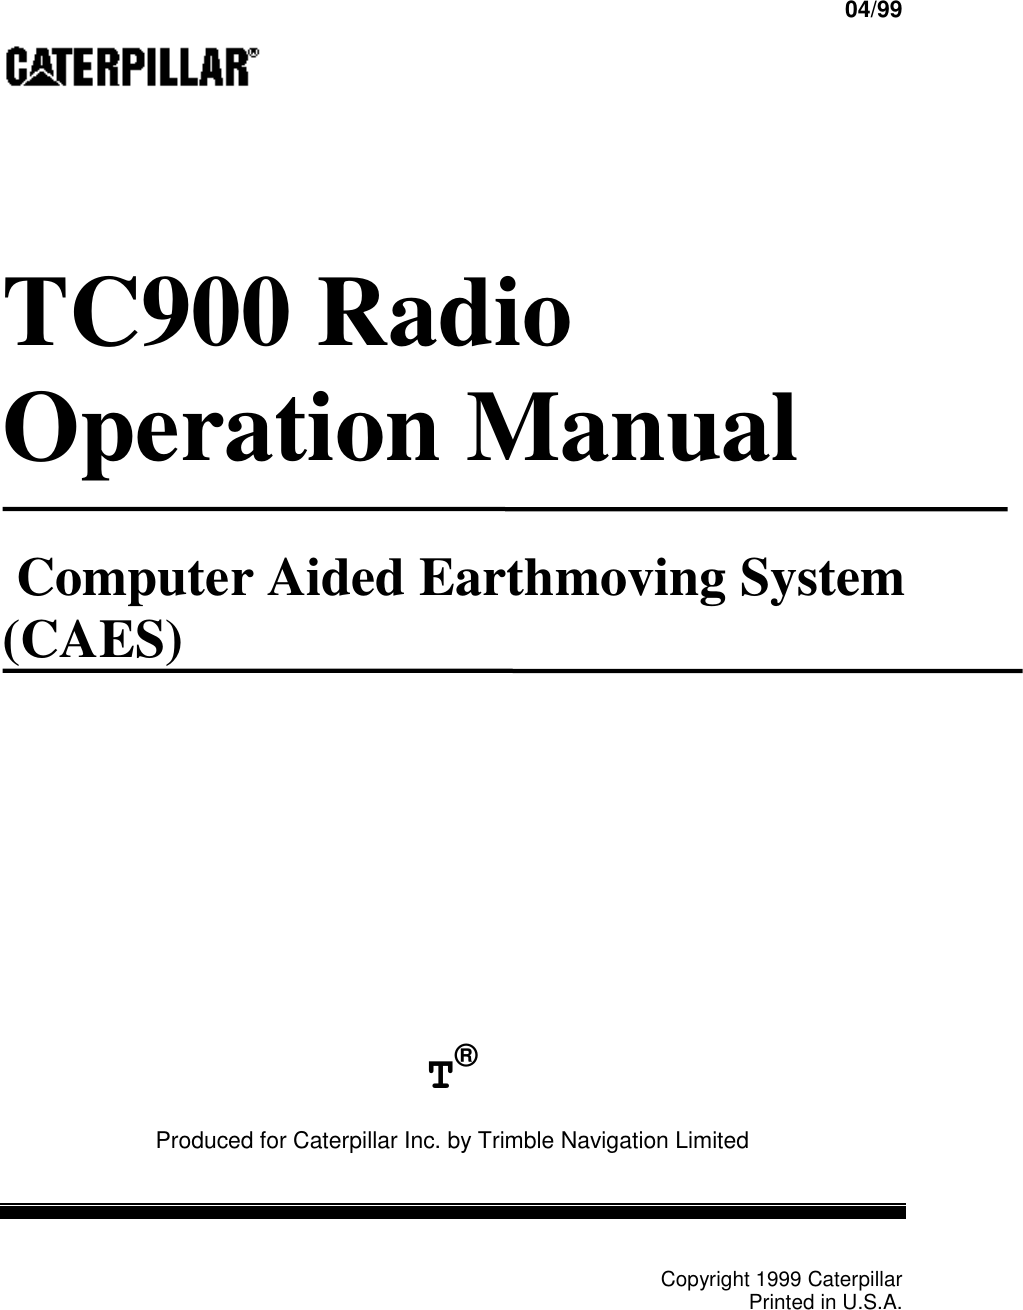 FORM NO. FELN003204/99TC900 RadioOperation Manual Computer Aided Earthmoving System(CAES)T®Produced for Caterpillar Inc. by Trimble Navigation LimitedCopyright 1999 CaterpillarPrinted in U.S.A.